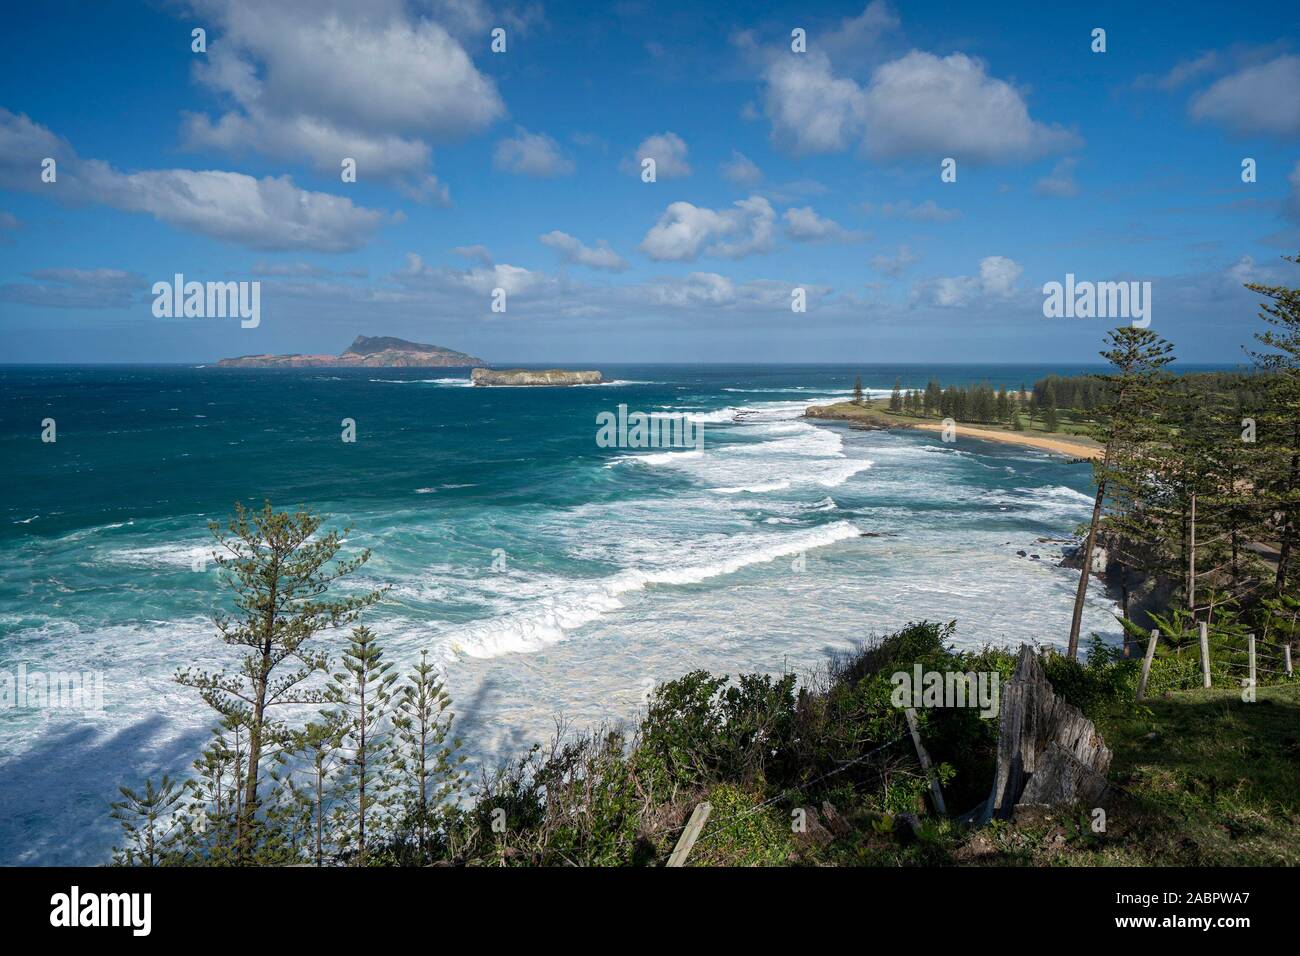 Cemetery Bay with Phillip Island seven km off the coast. The 190-hectare island is part of Norfolk Island National Park. Landing entails jumping from Stock Photo